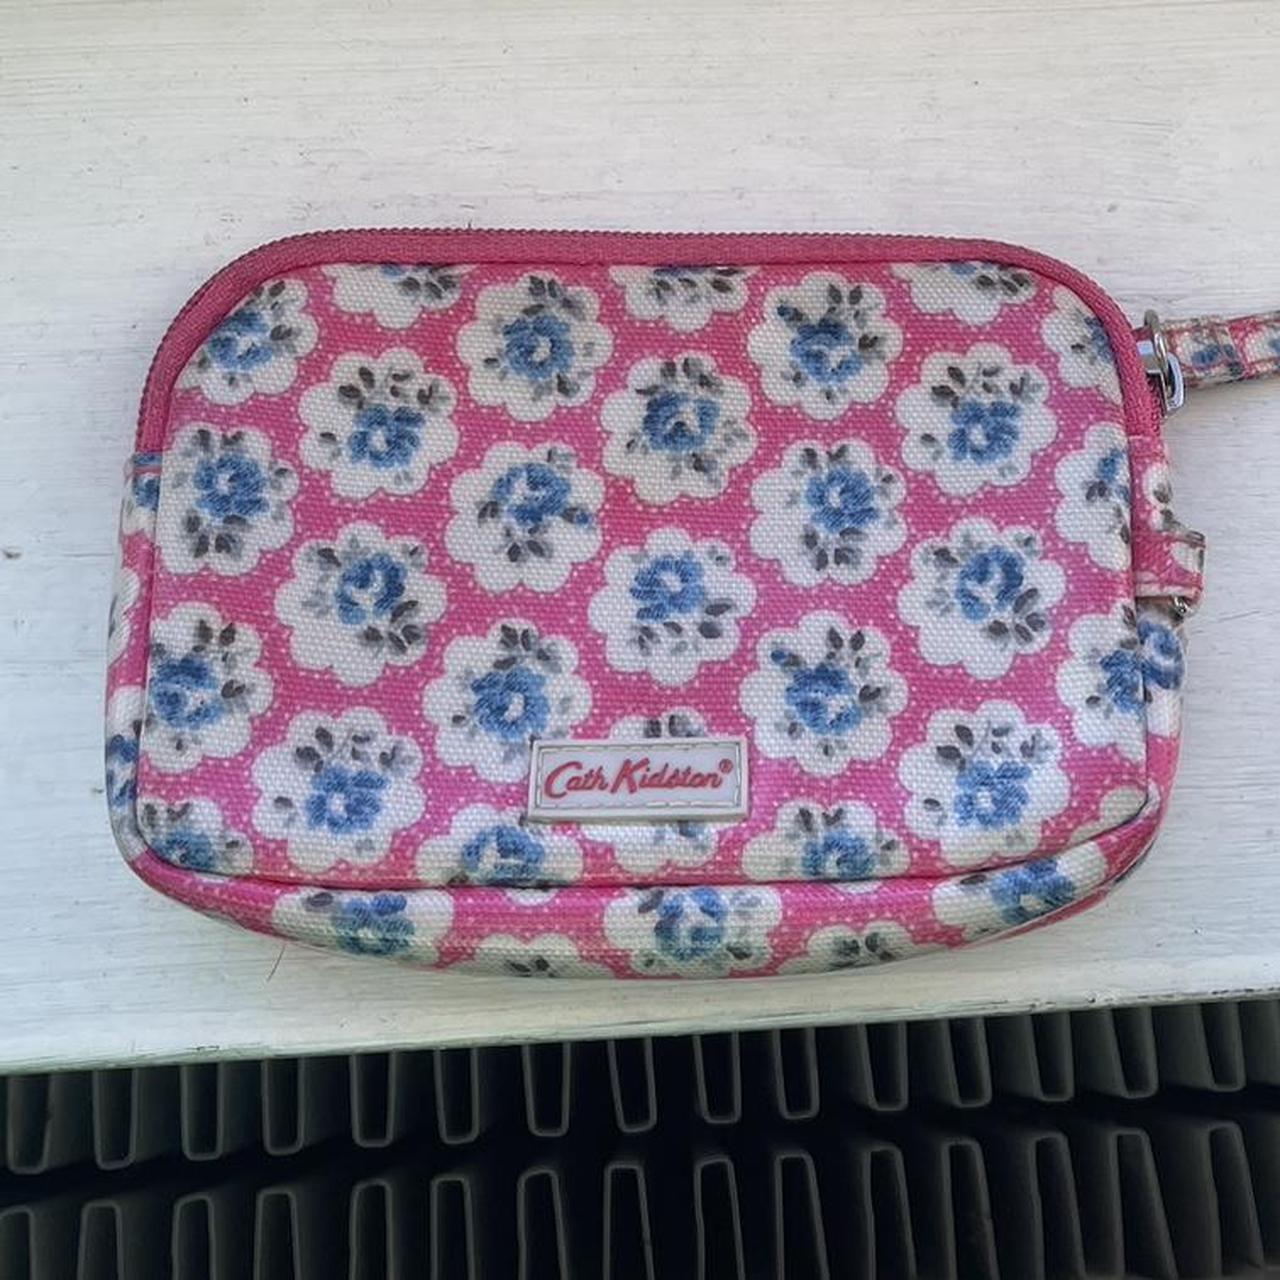 New in - Women's, Kids Bags, Fashion, Gifts | Cath Kidston